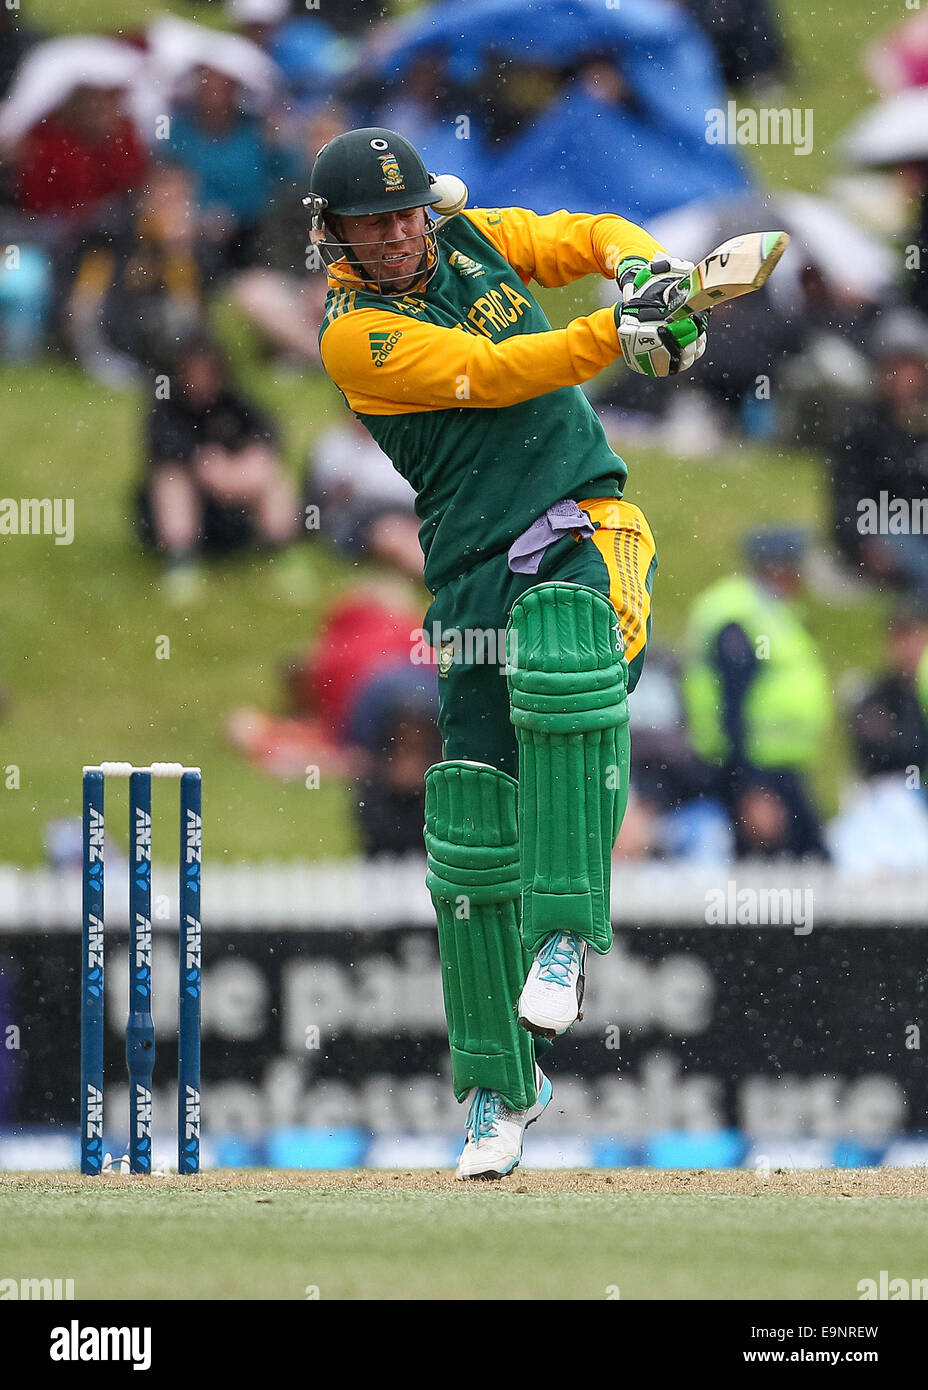 Hamilton, New Zealand. 27th Oct, 2014. South Africa captain AB de Villers gets into an awkward position playing a short ball from New Zealand's Tim Southee during the ANZ One Day International Series, NZ v South Africa at Seddon Park, Hamilton, New Zealand © Action Plus Sports/Alamy Live News Stock Photo